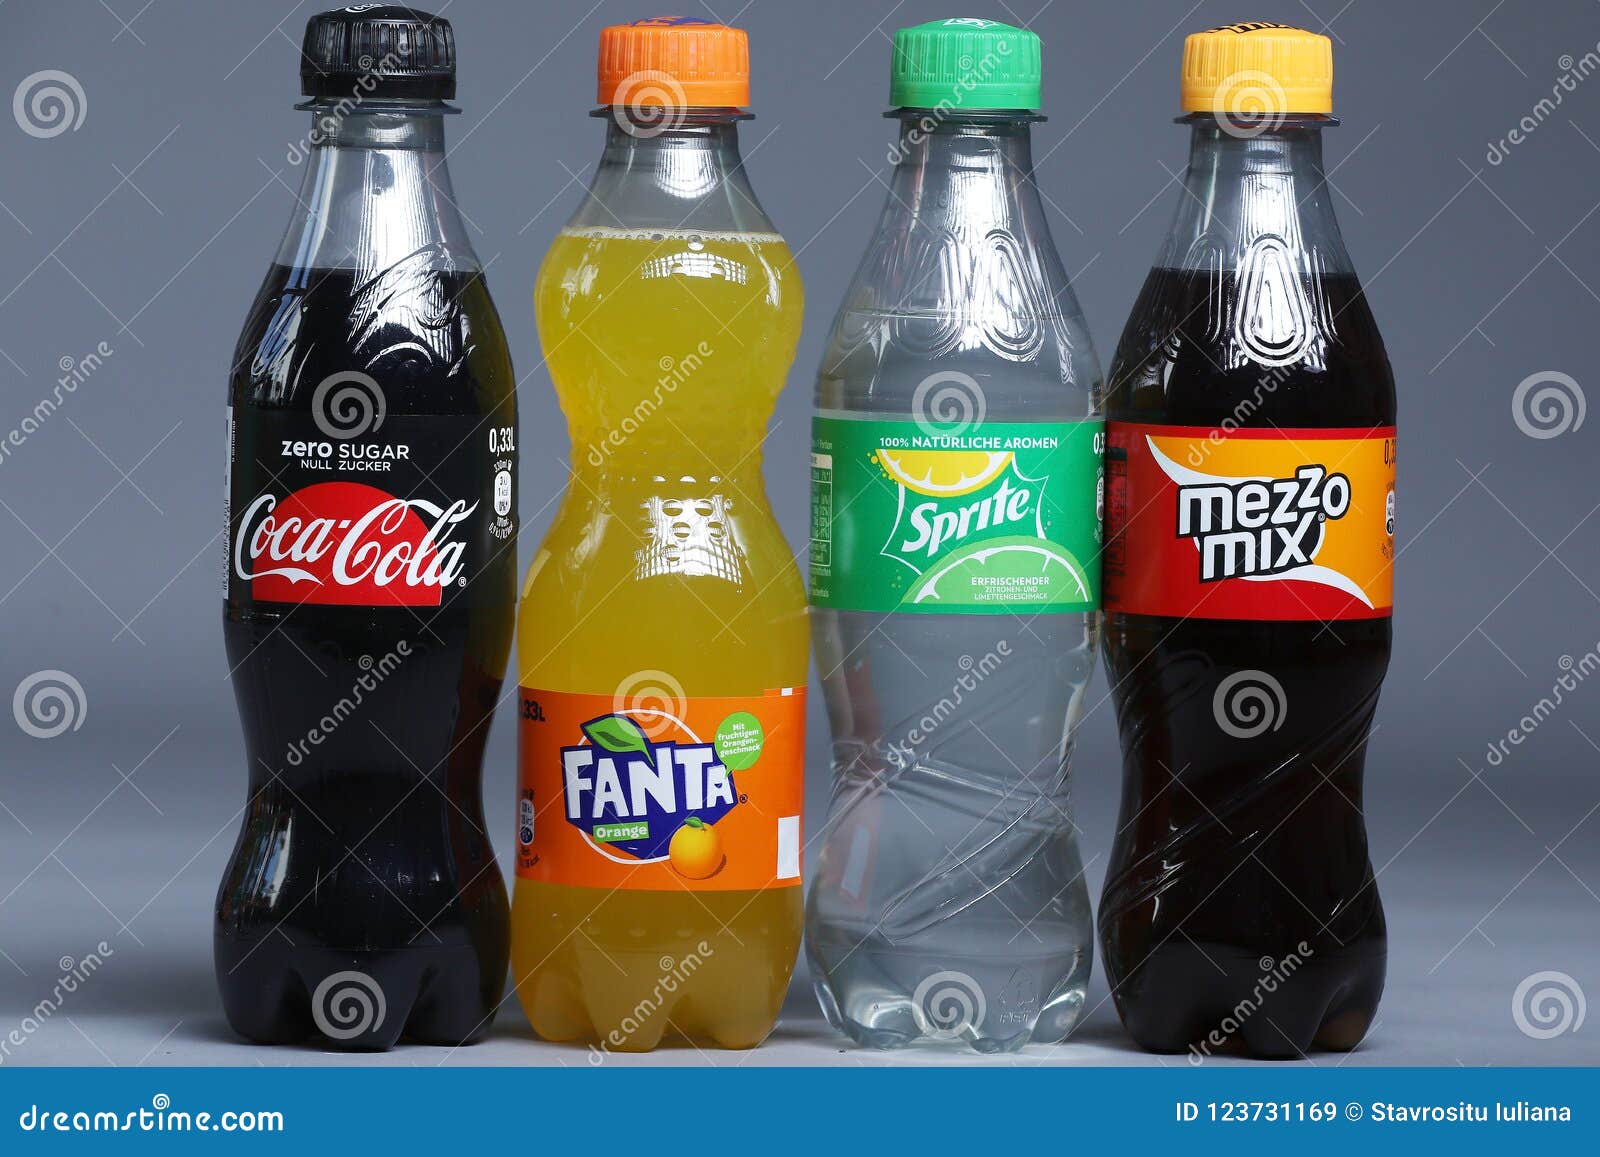 Stock of - Editorial Image Mix Mezzo Image of drinking, Bottles drinks: and Fanta, 123731169 Drinks Cola, Sprite